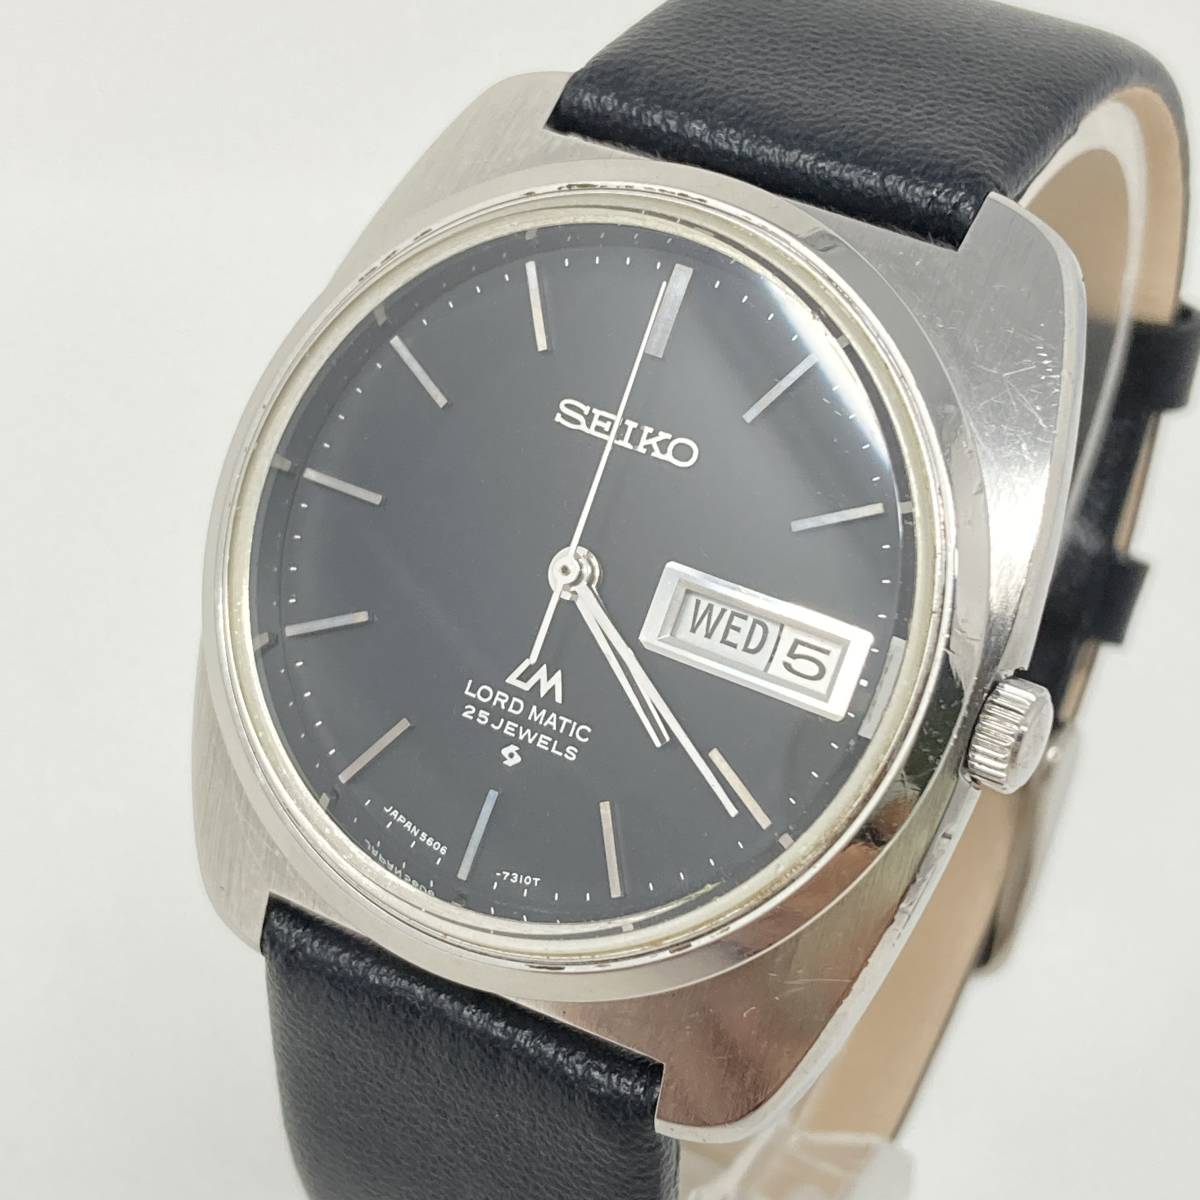 #489 SEIKO LORD MATIC LM 25J AUTOMATIC Ref.5606-7130 Vintage